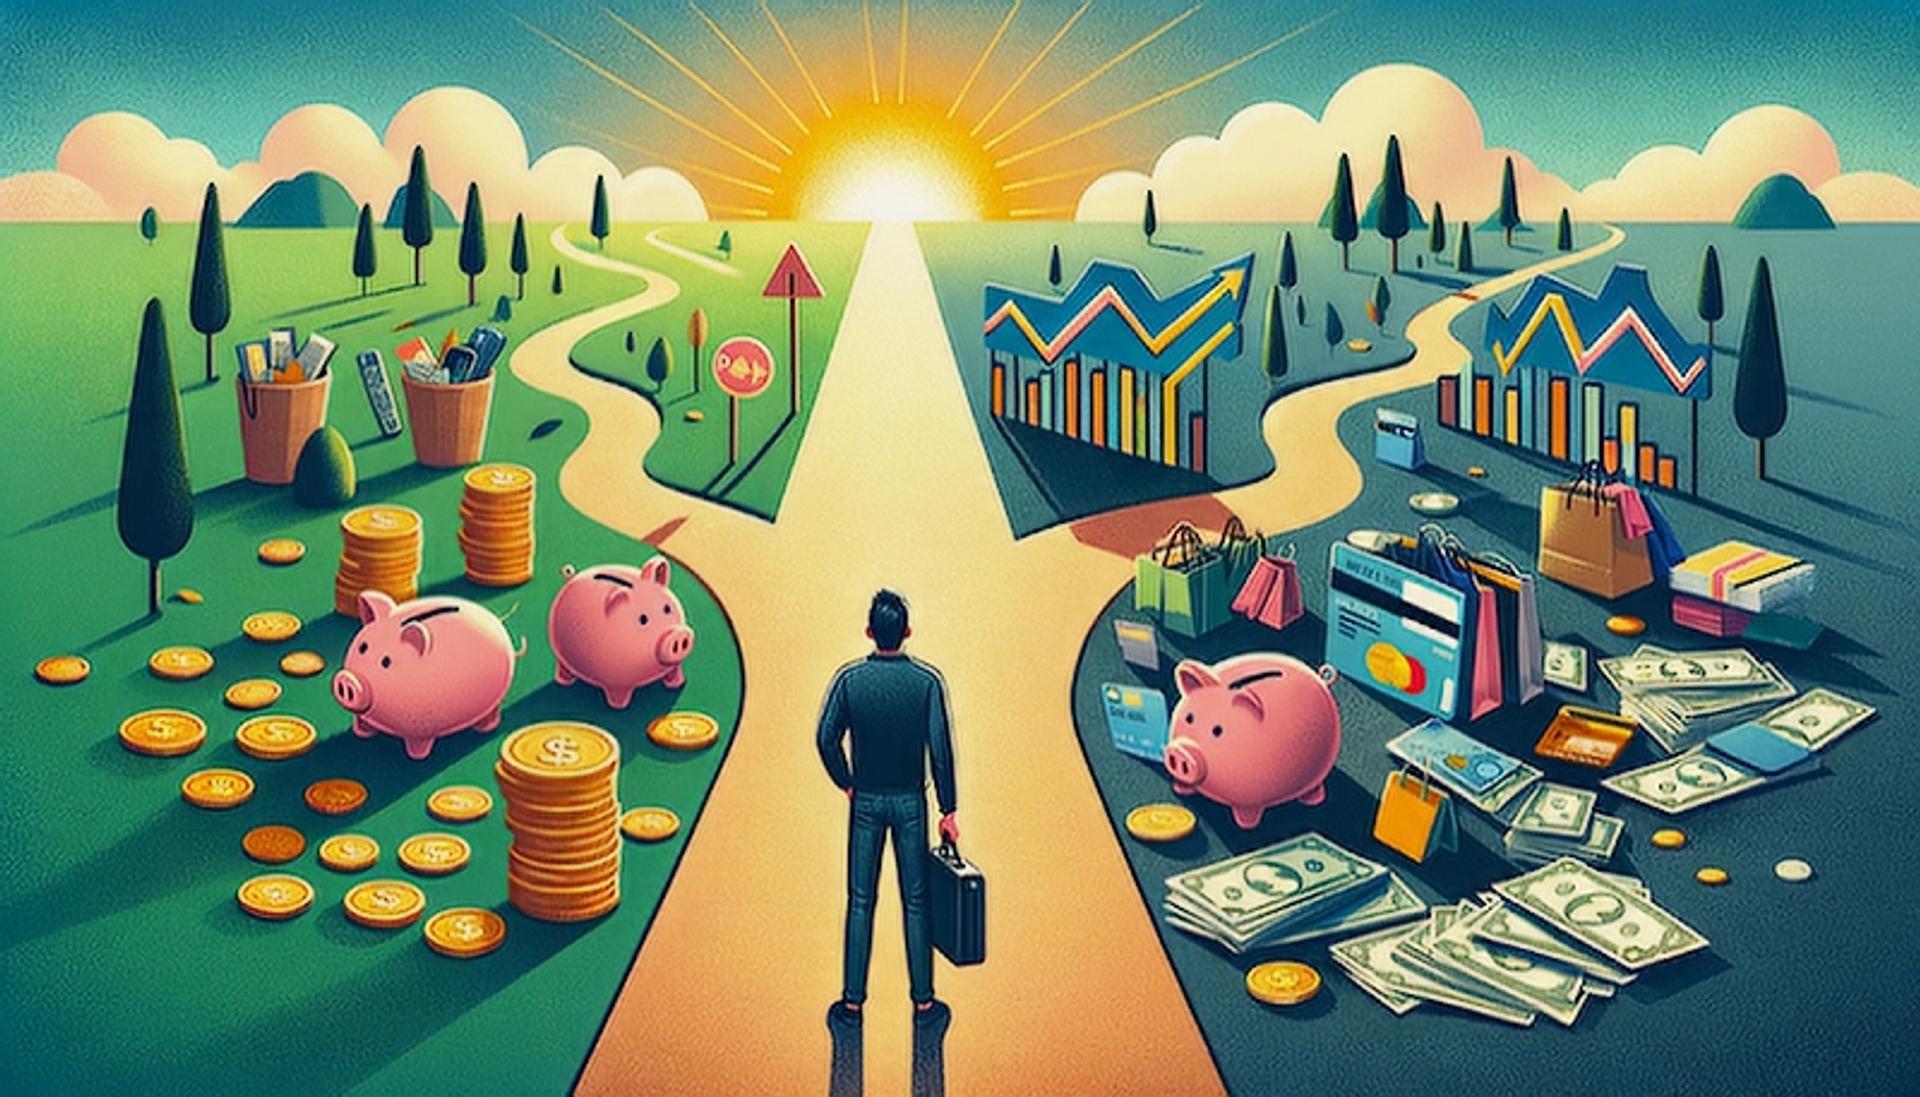 Person at a crossroads deciding between a path of financial growth and stability and a path leading to debt and financial distress, symbolizing the psychology of spending decisions.